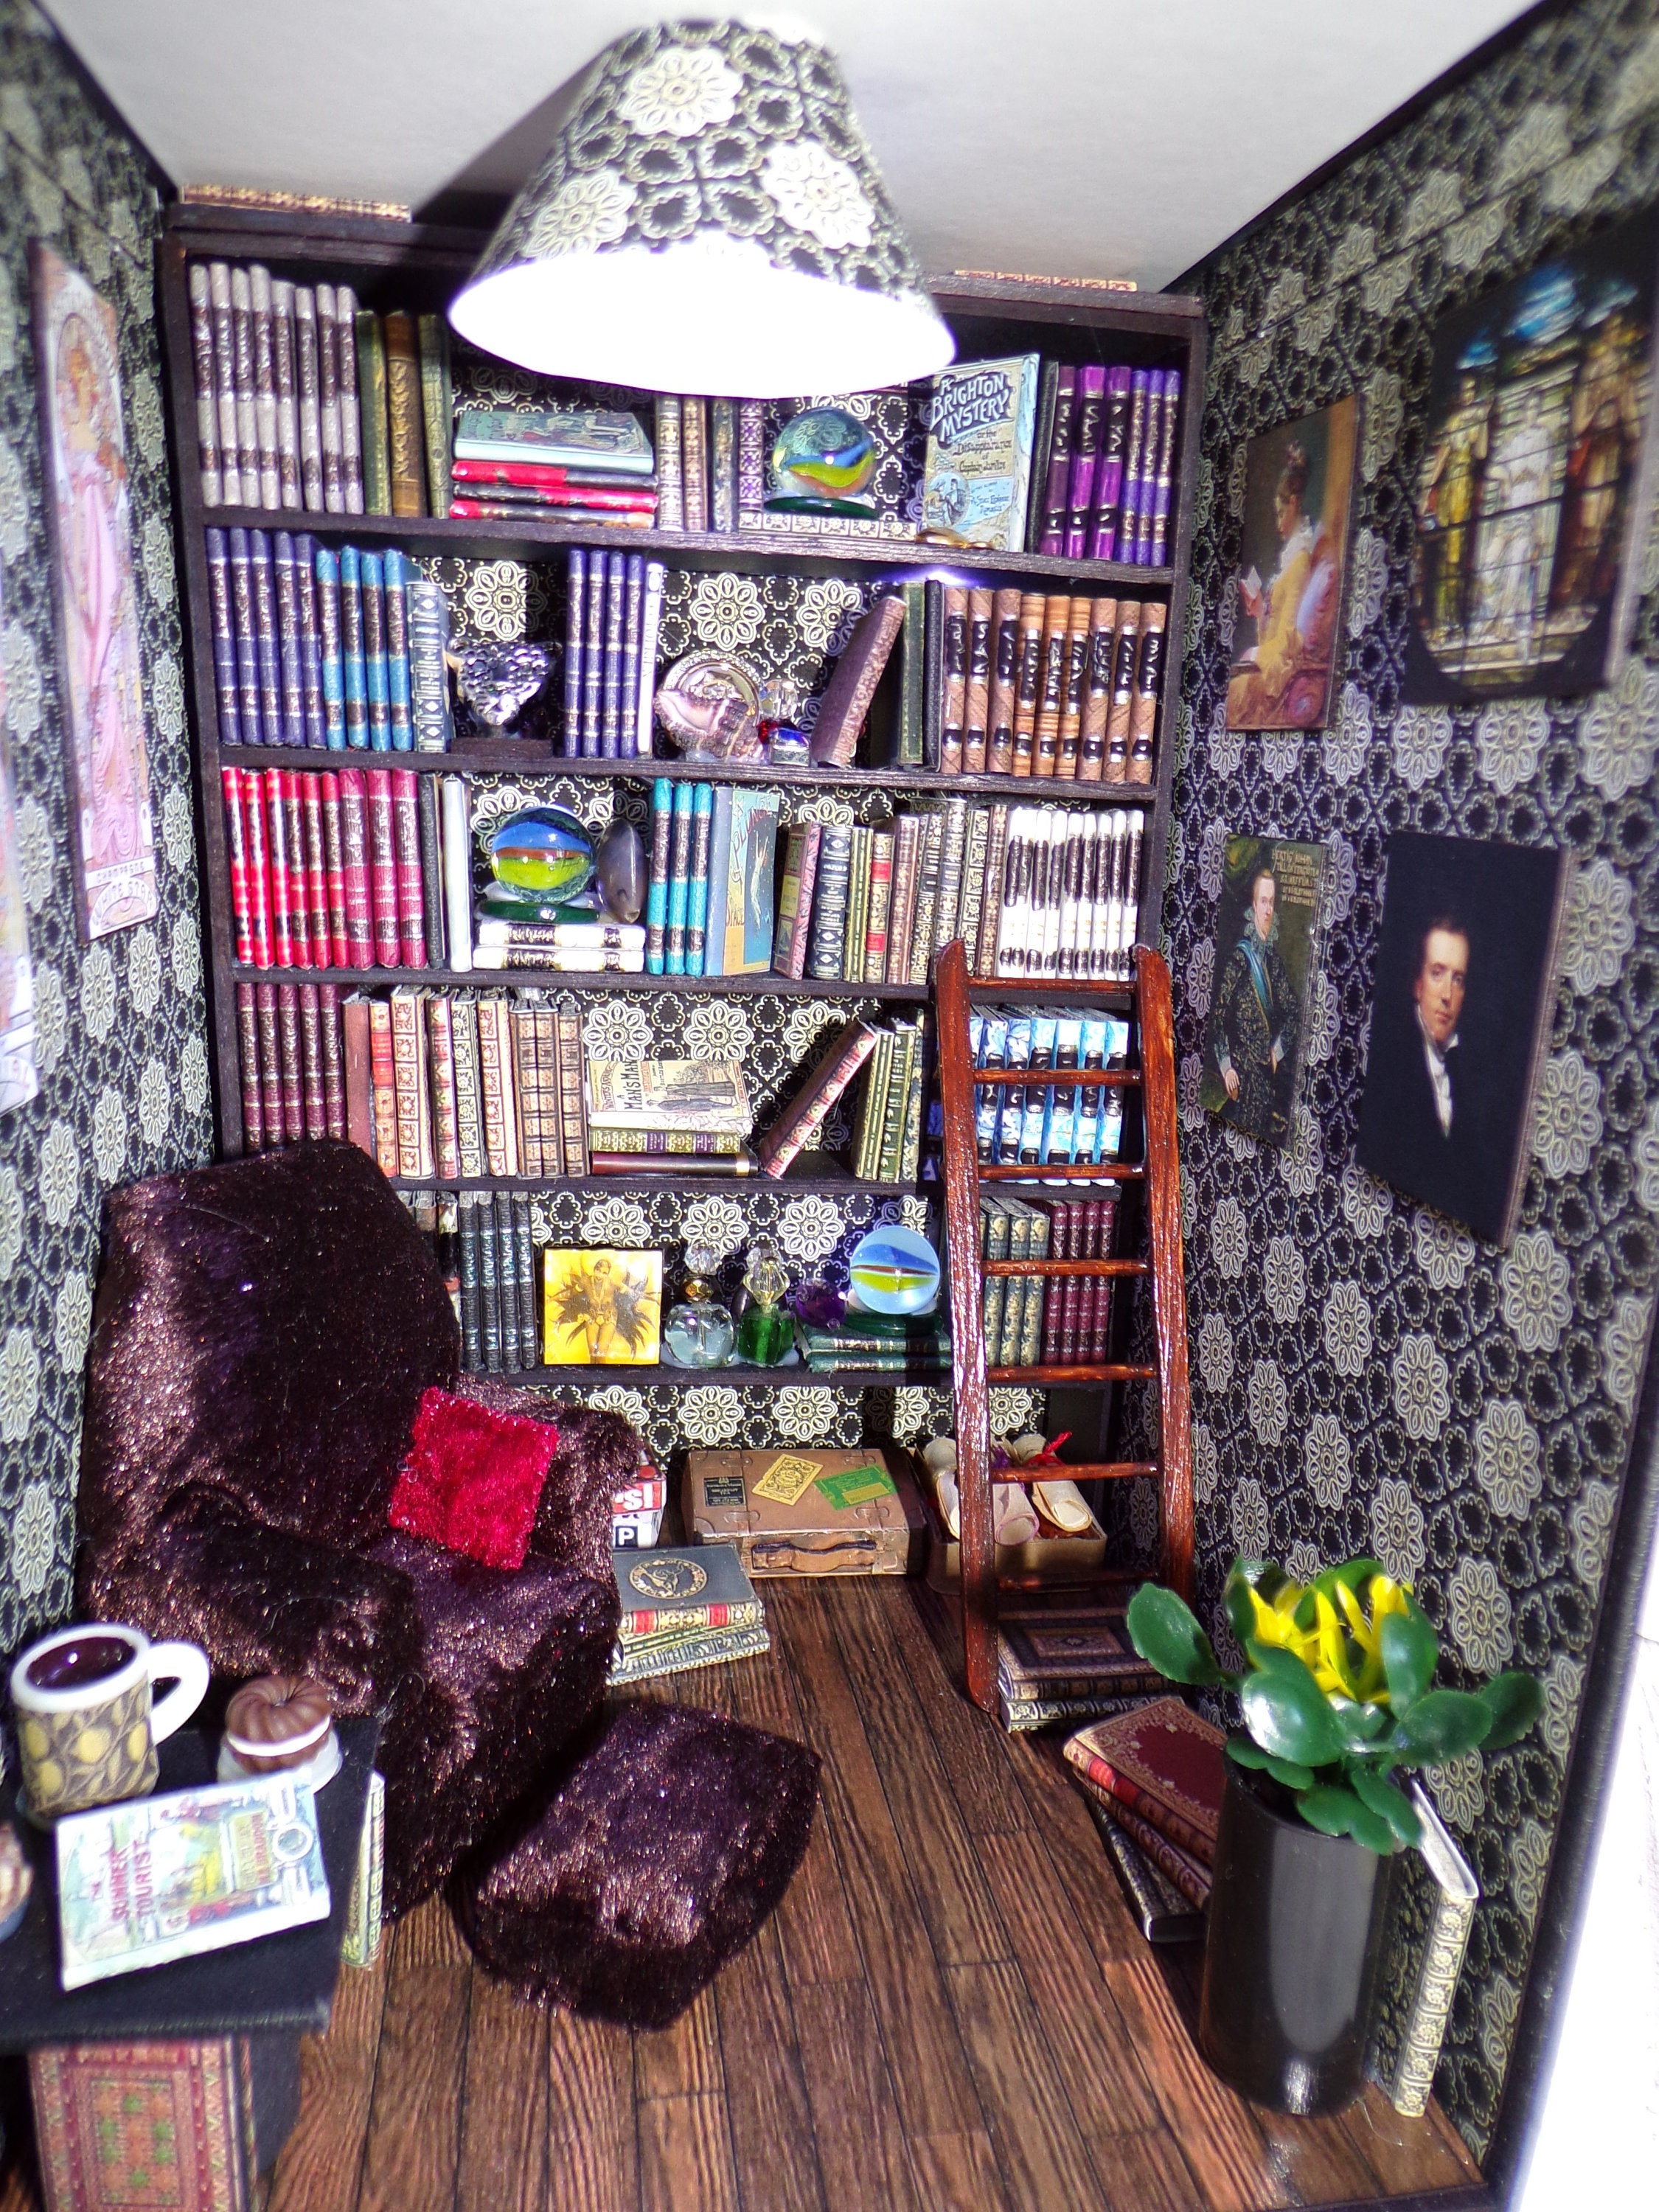 Booknook, Book Nook, Diorama. Book Alley Shelf Insert, Book Lover Gift,  Library Room, Heaps of Books, Cosy Chair. 